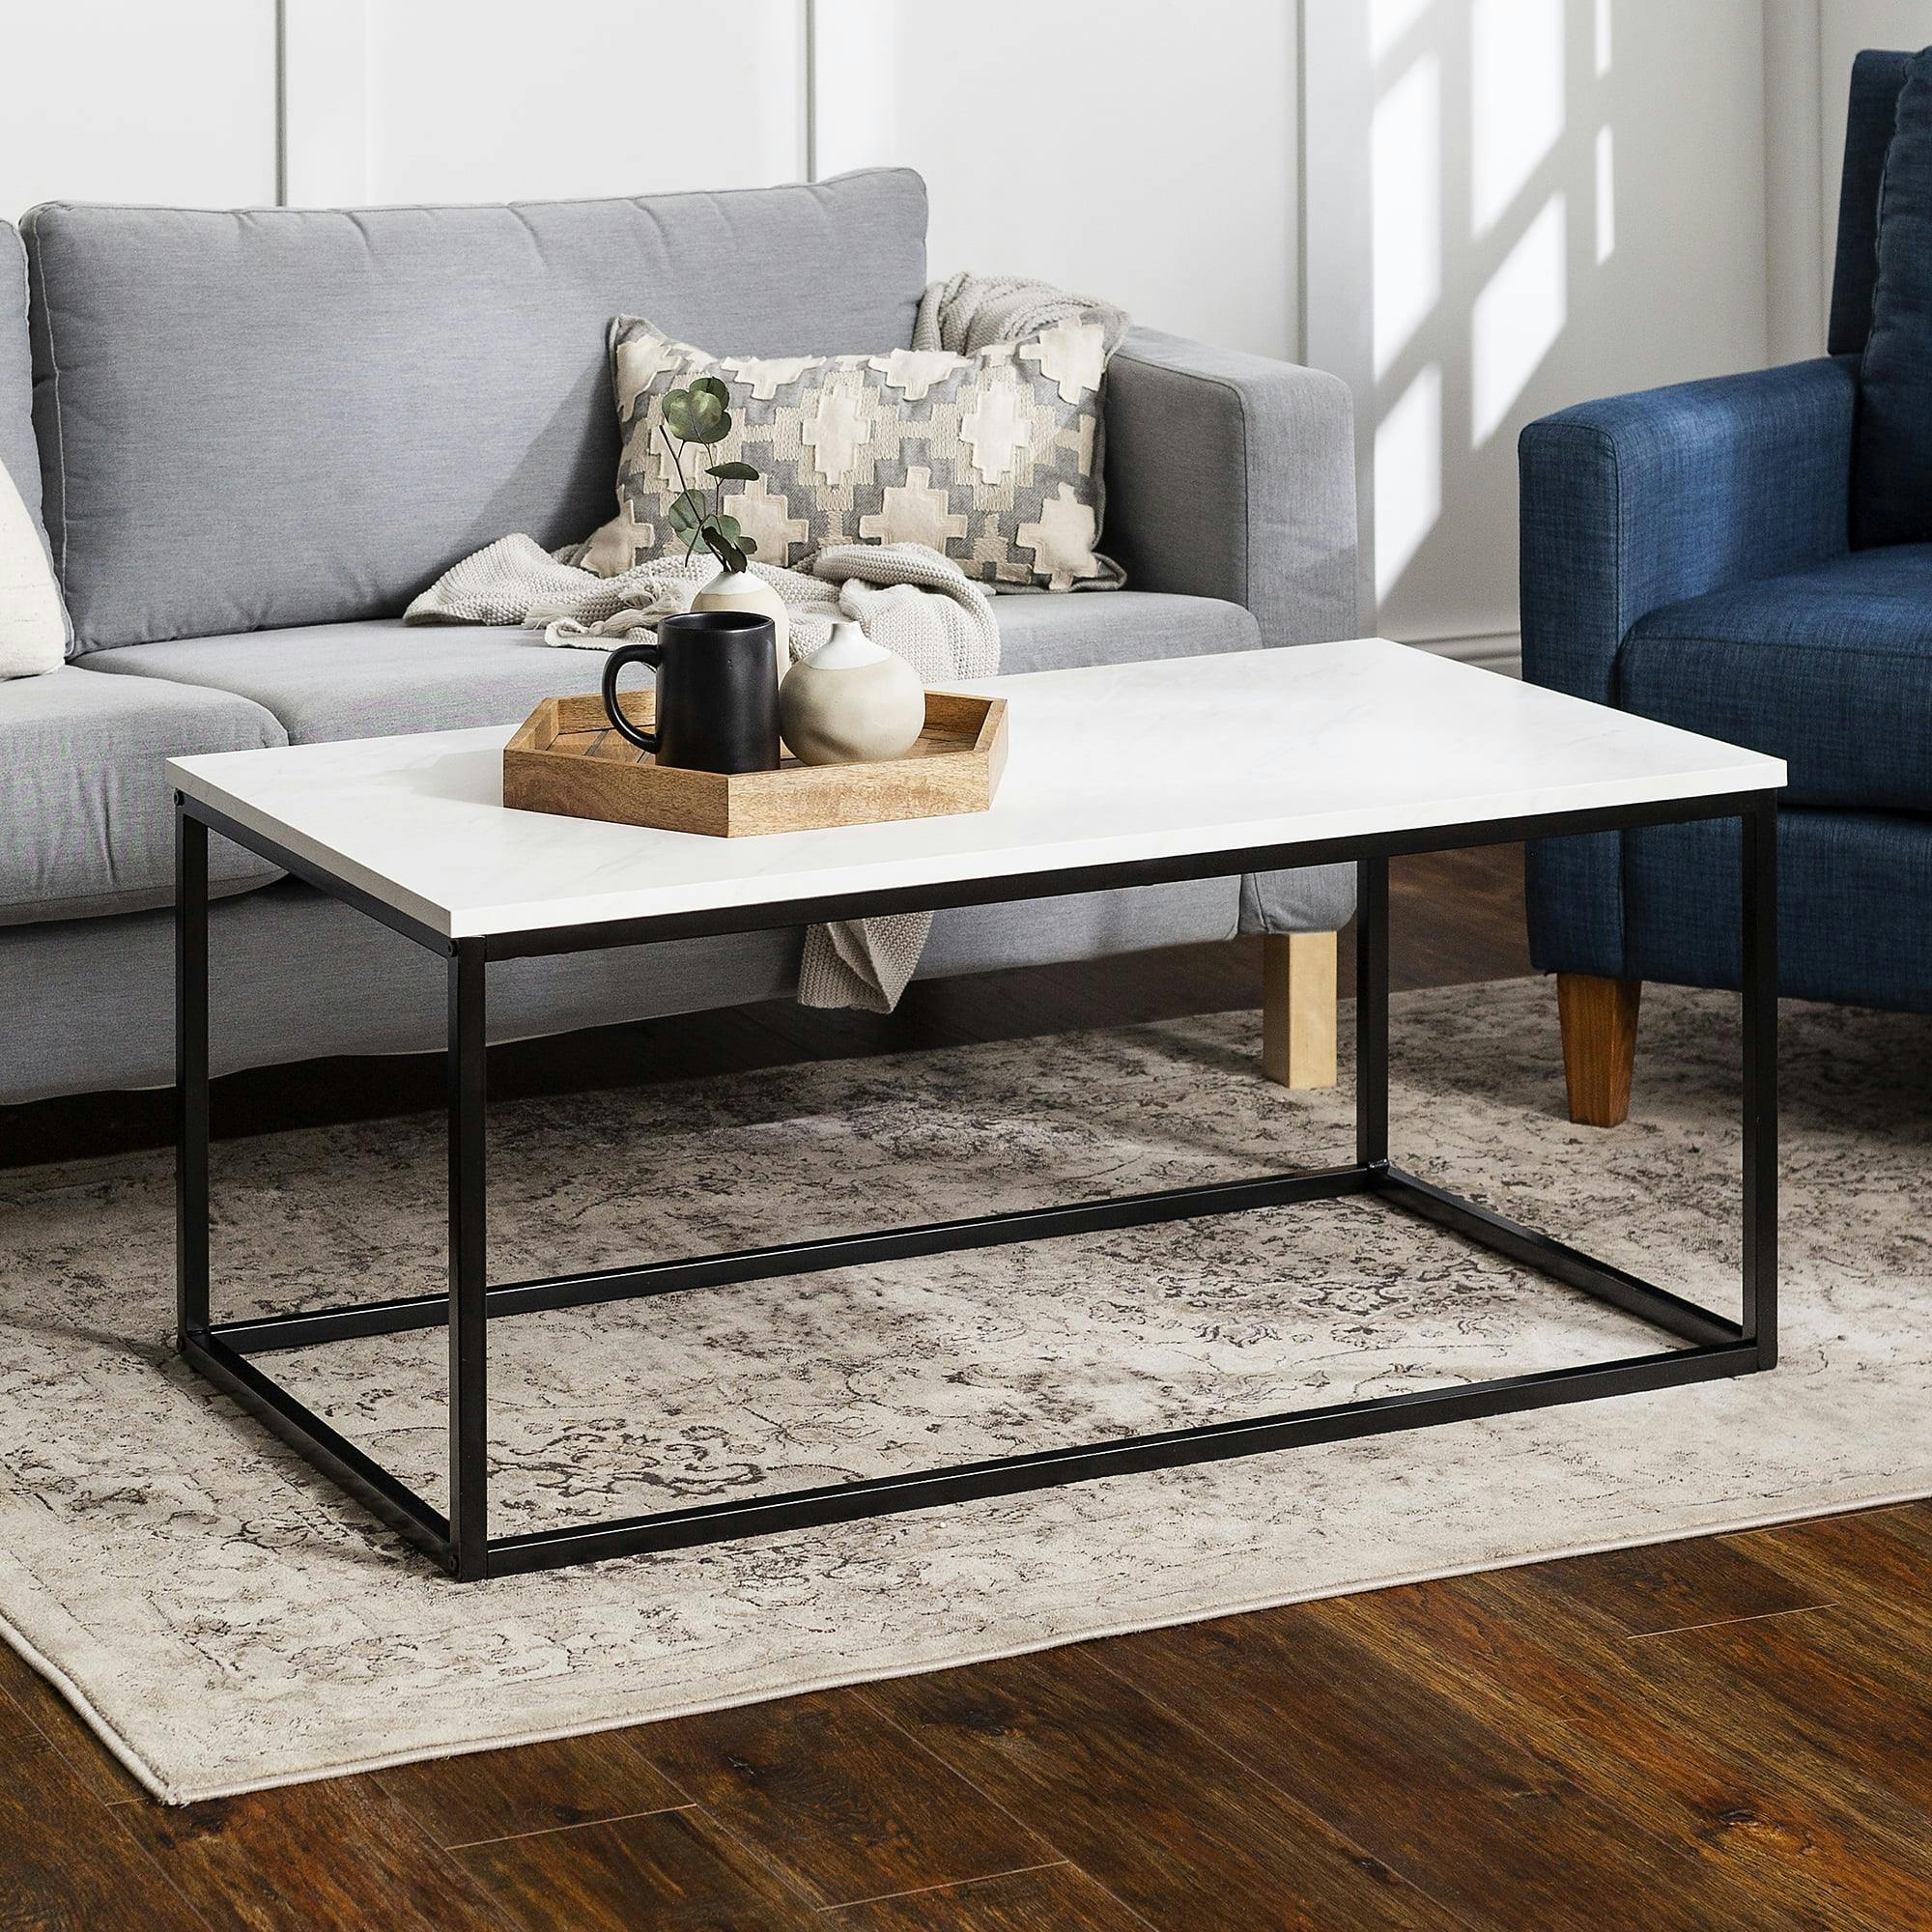 Sleek Black Rectangular Coffee Table with Faux Marble Top